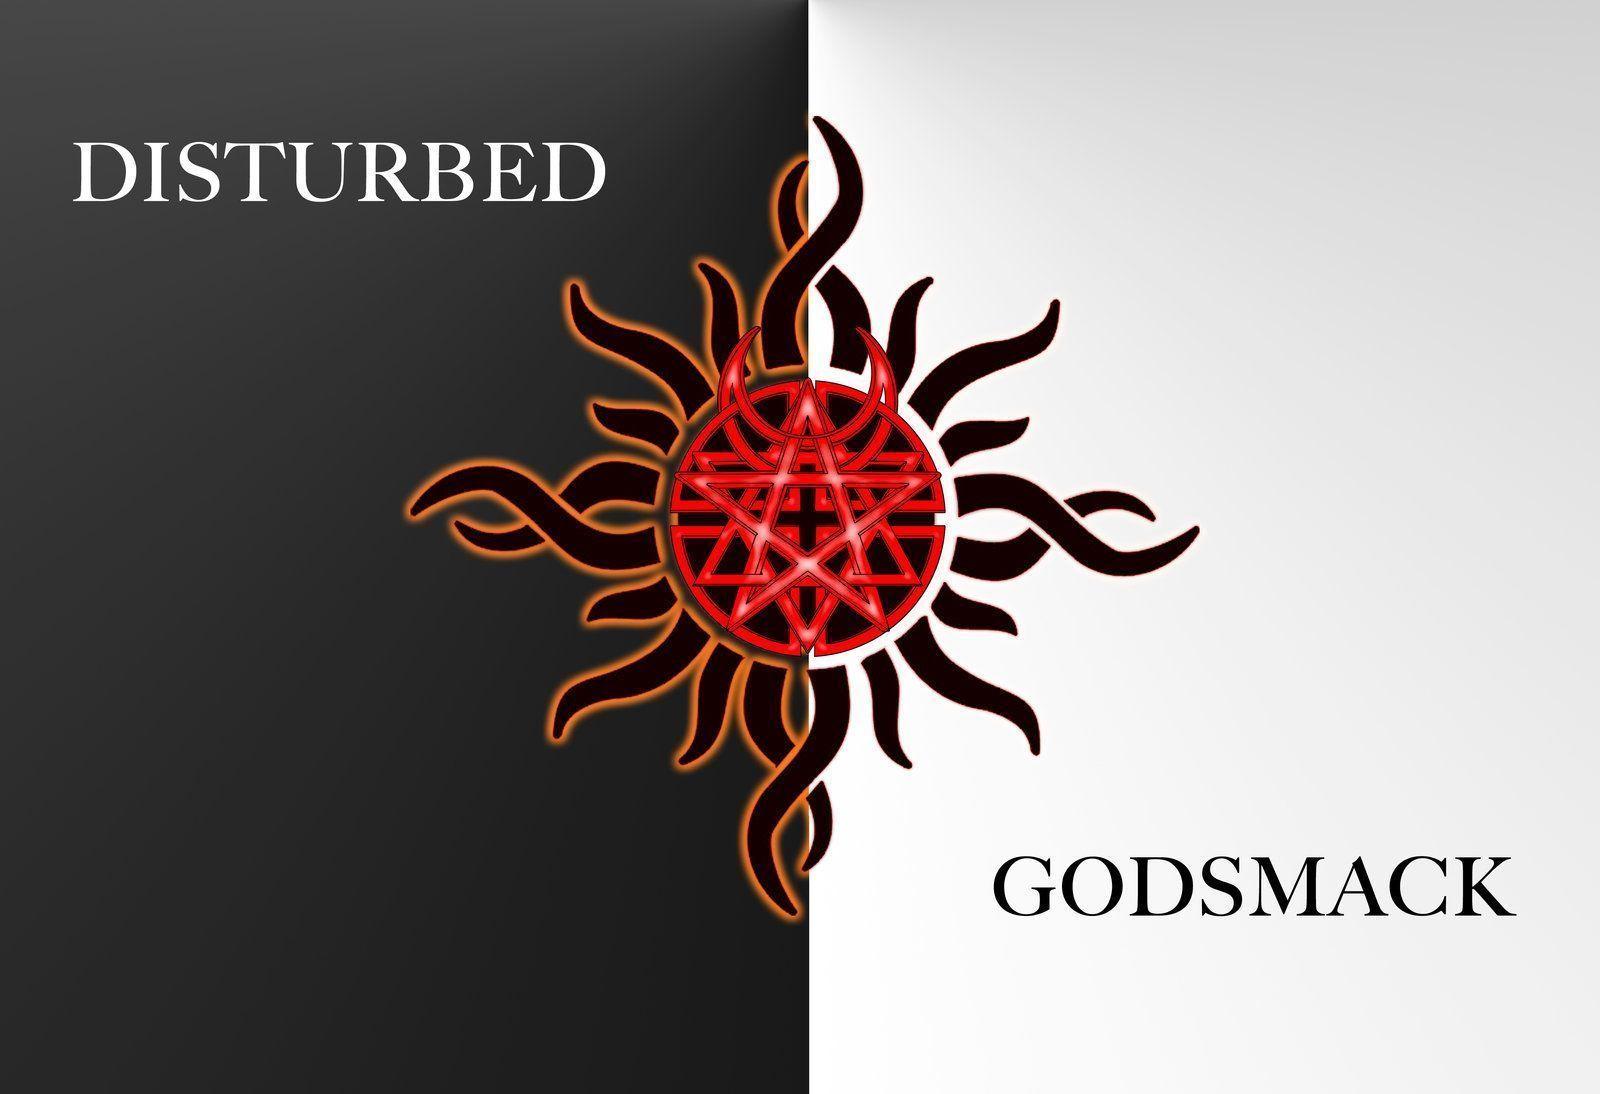 Disturbed Godsmack Wallpapers by SouthernDisturbedOne